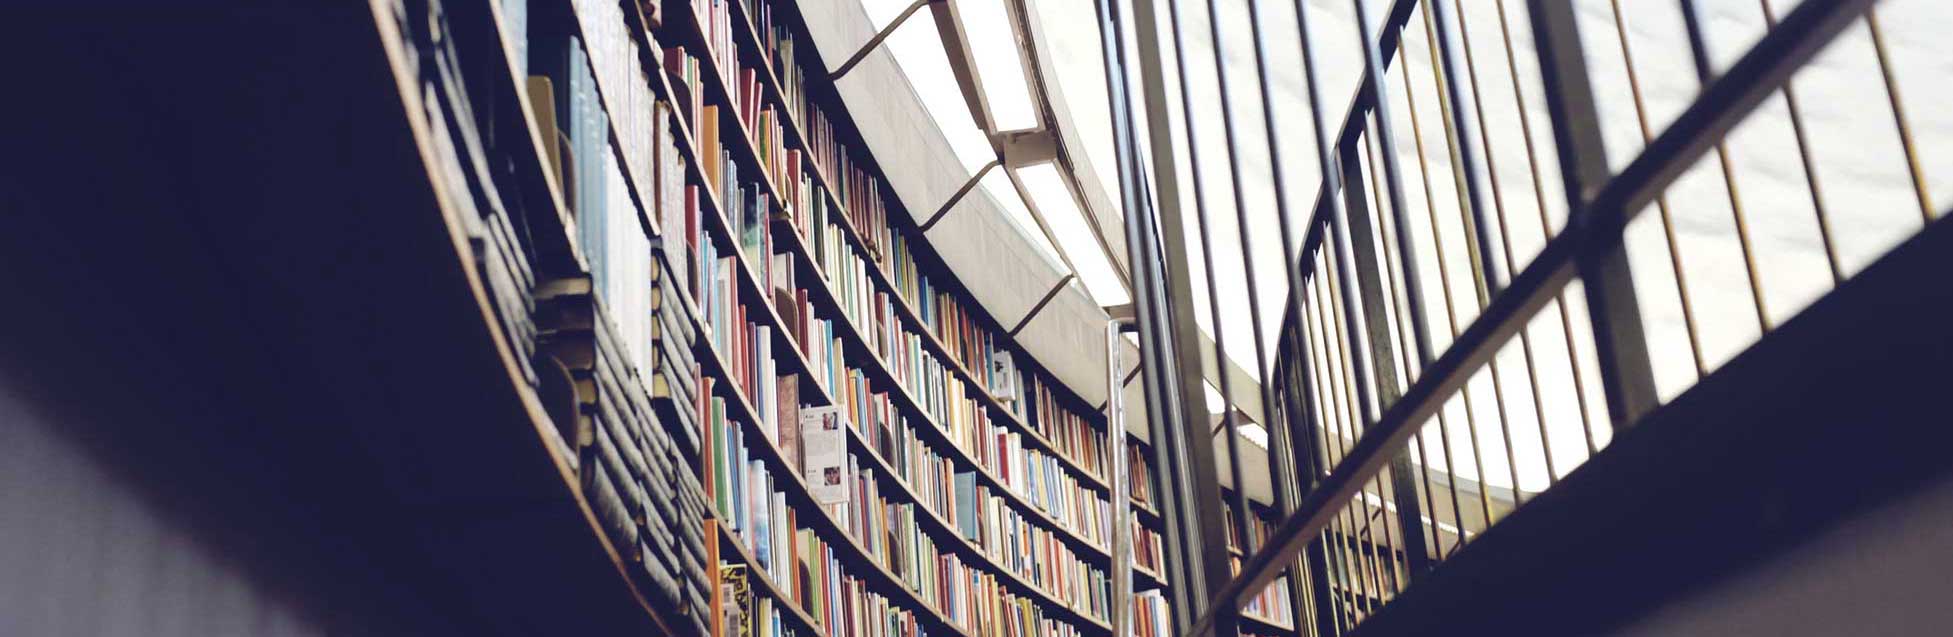 Library Banner Image